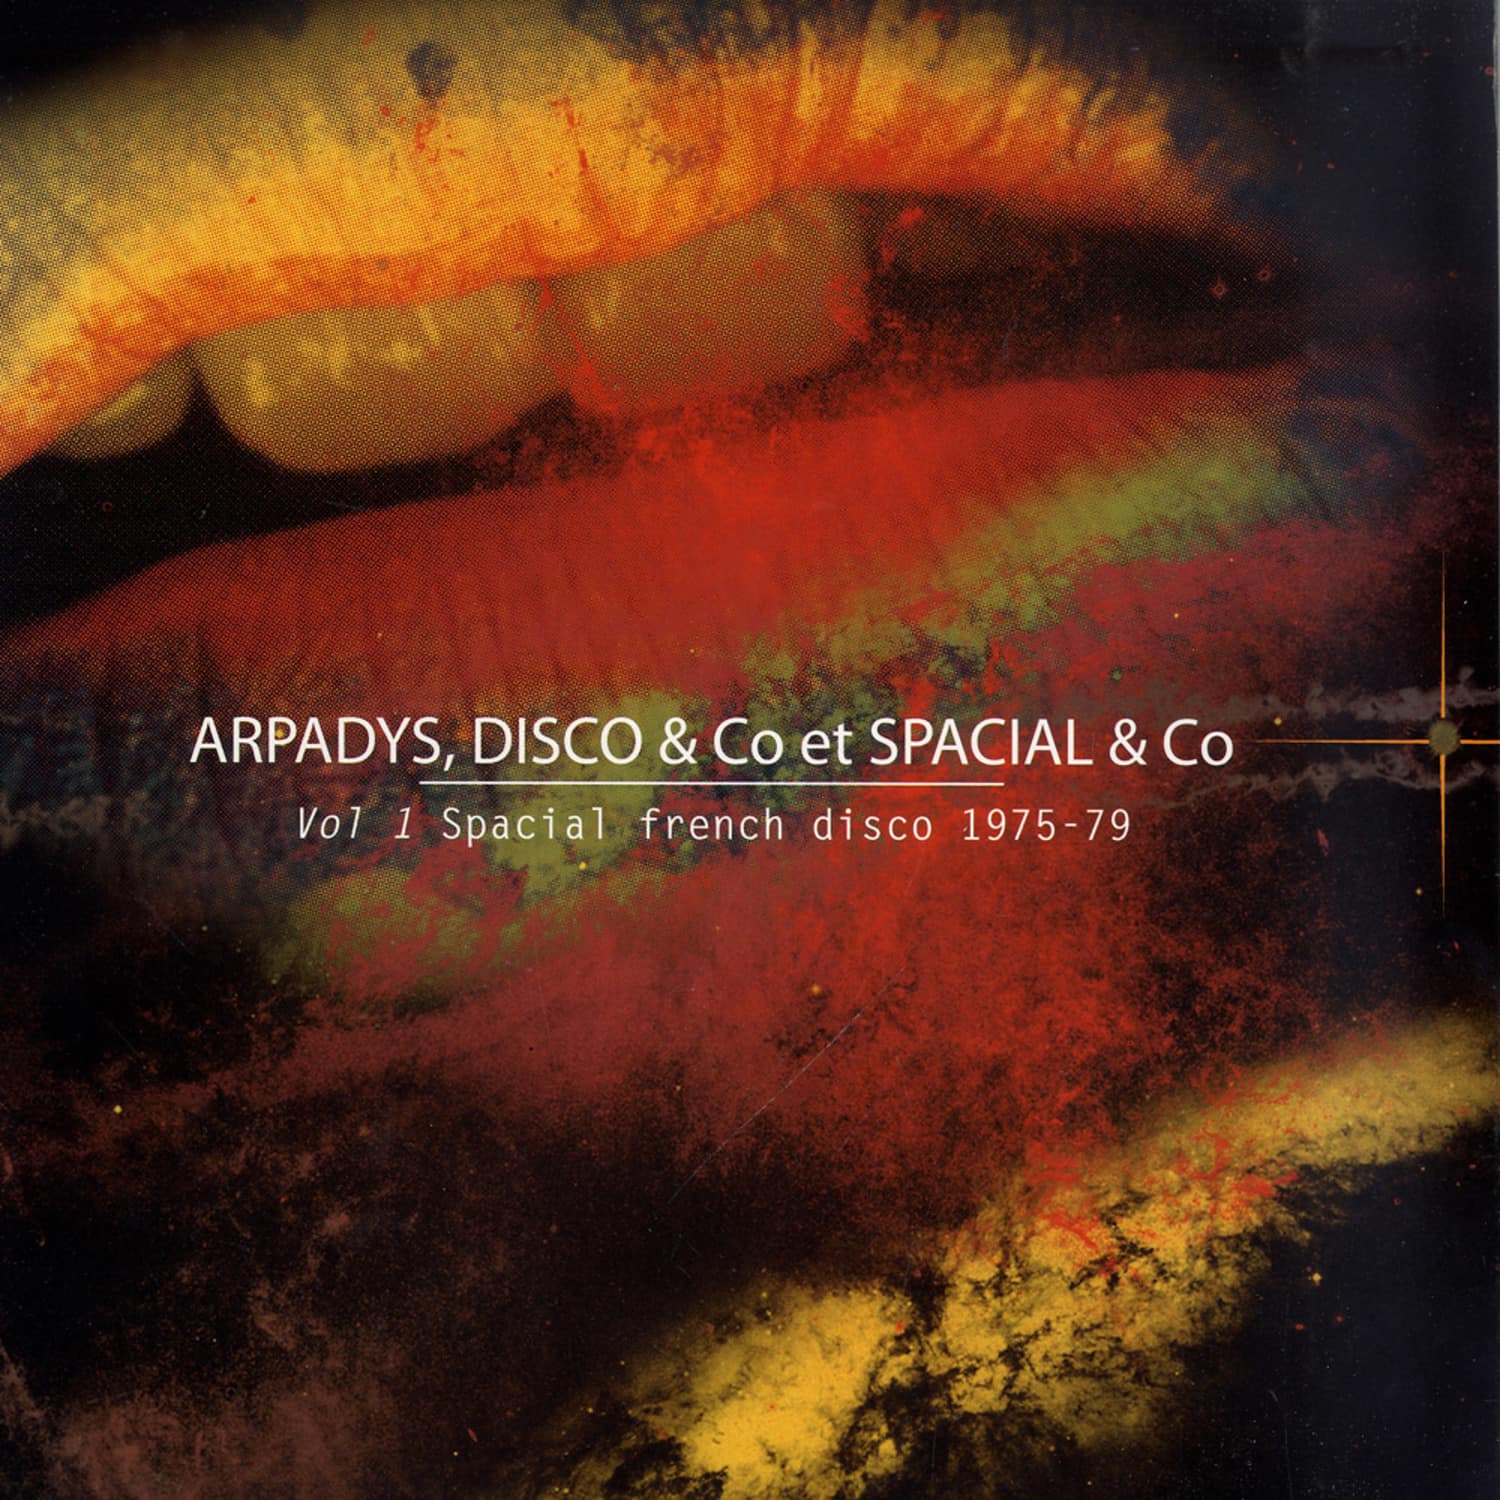 Arpadys, Disco & Co - VOL 1 SPECIAL FRENCH DISCO 1975 - 79